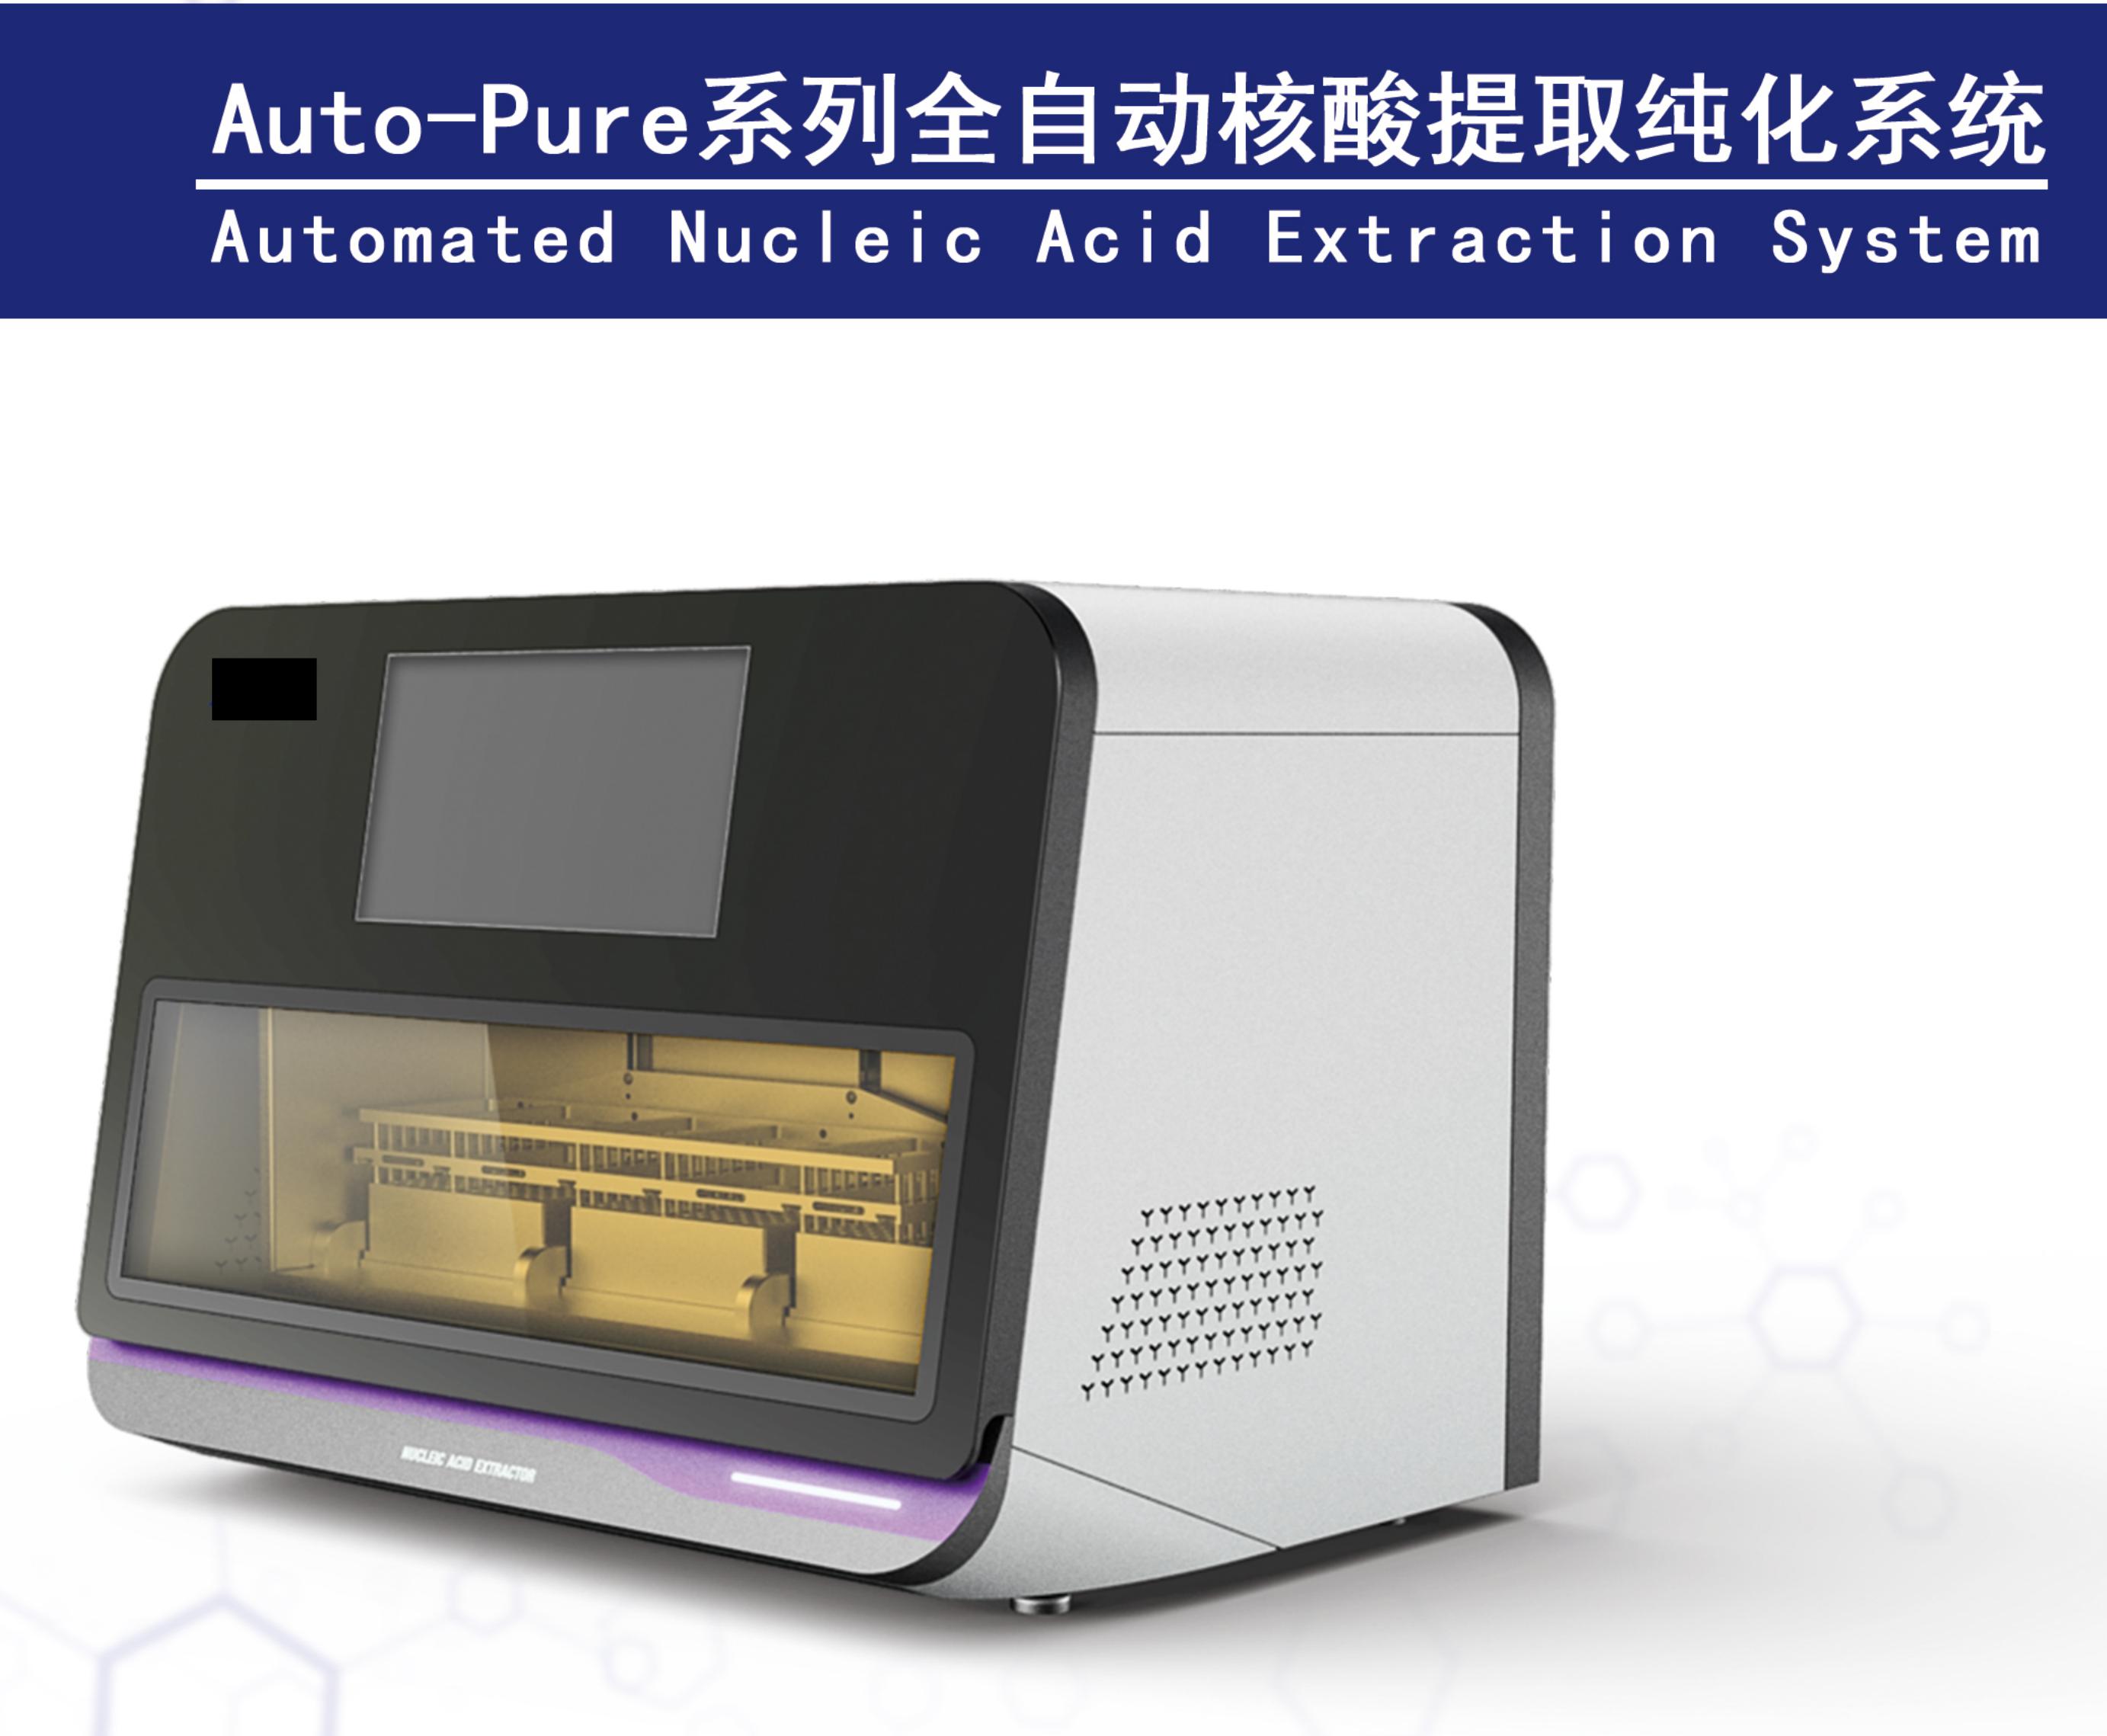 Automated Nucleic Acid Extraction System